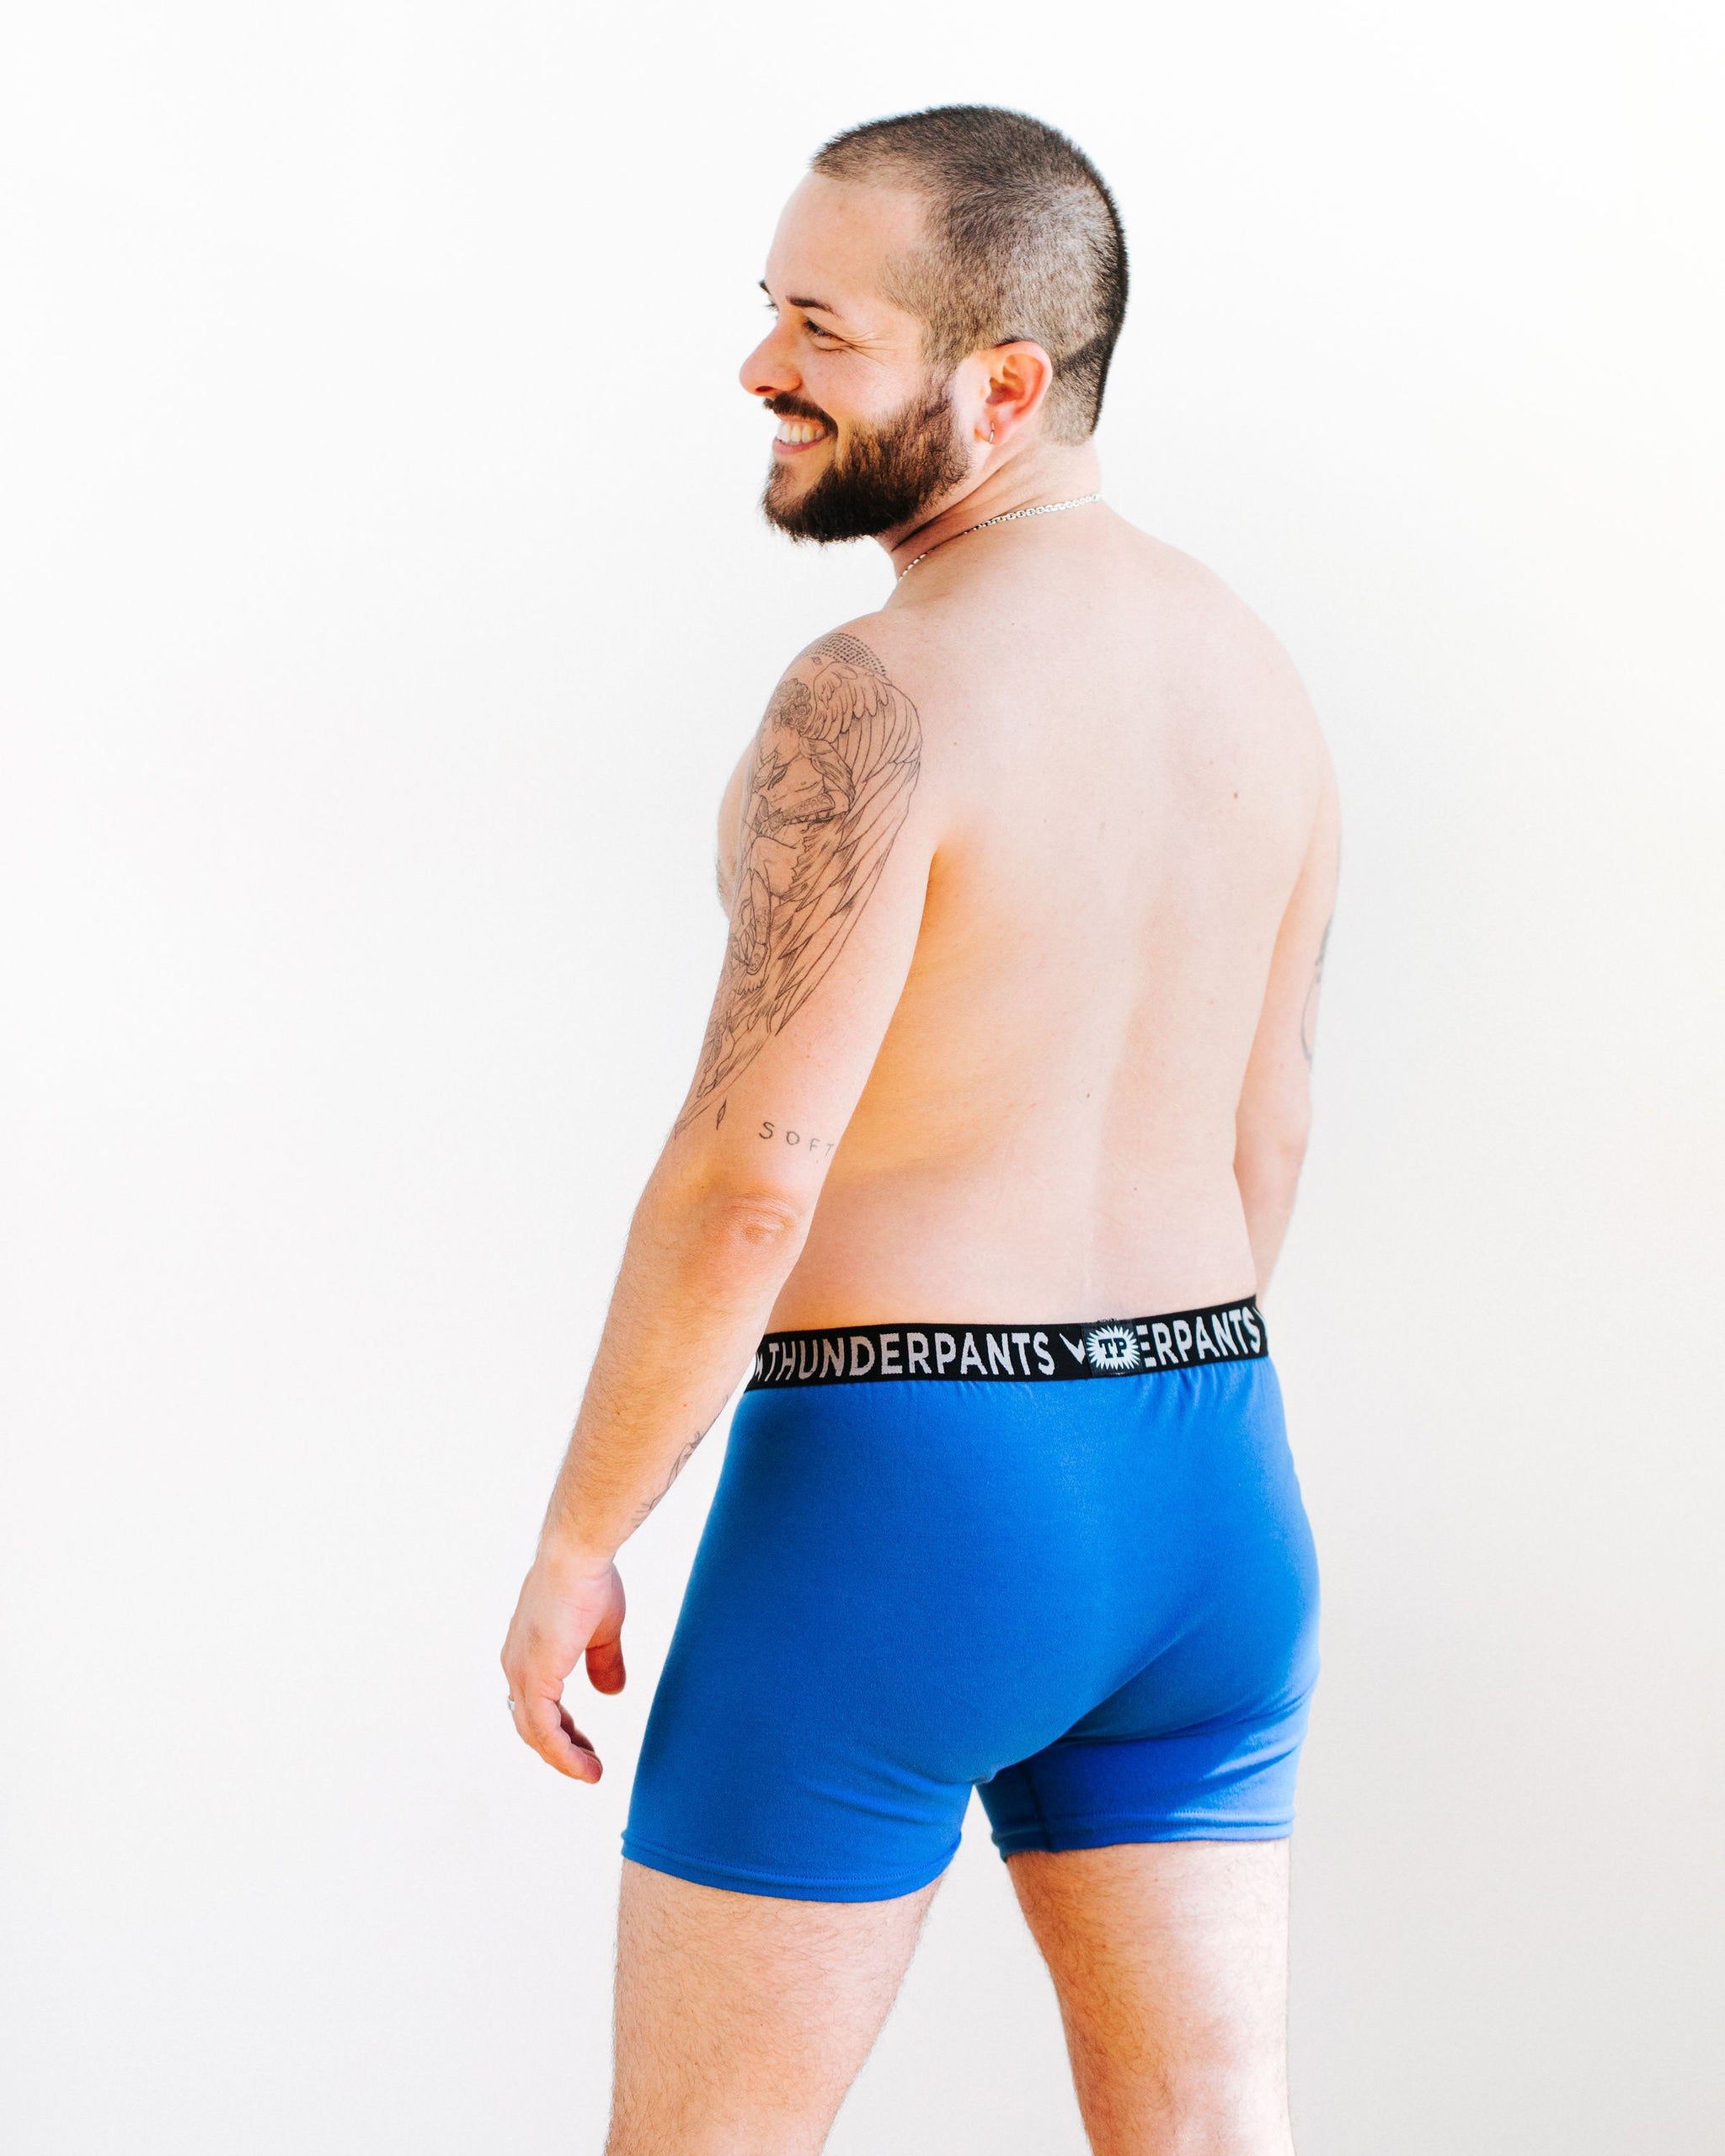 Back of model wearing Thunderpants Boxer Brief style underwear in Blueberry Blue.